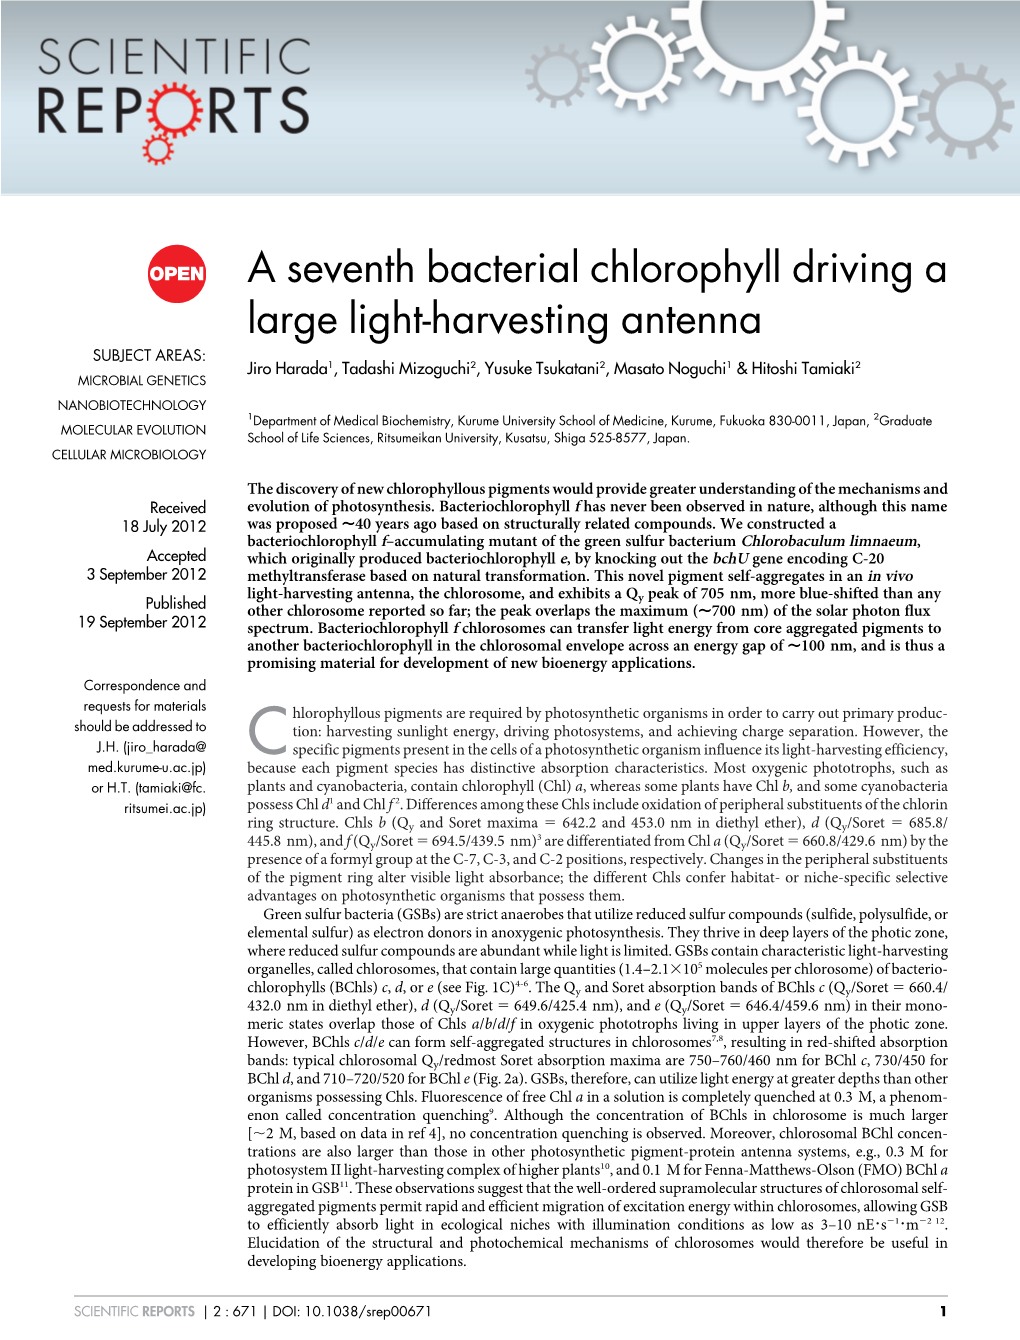 A Seventh Bacterial Chlorophyll Driving a Large Light-Harvesting Antenna